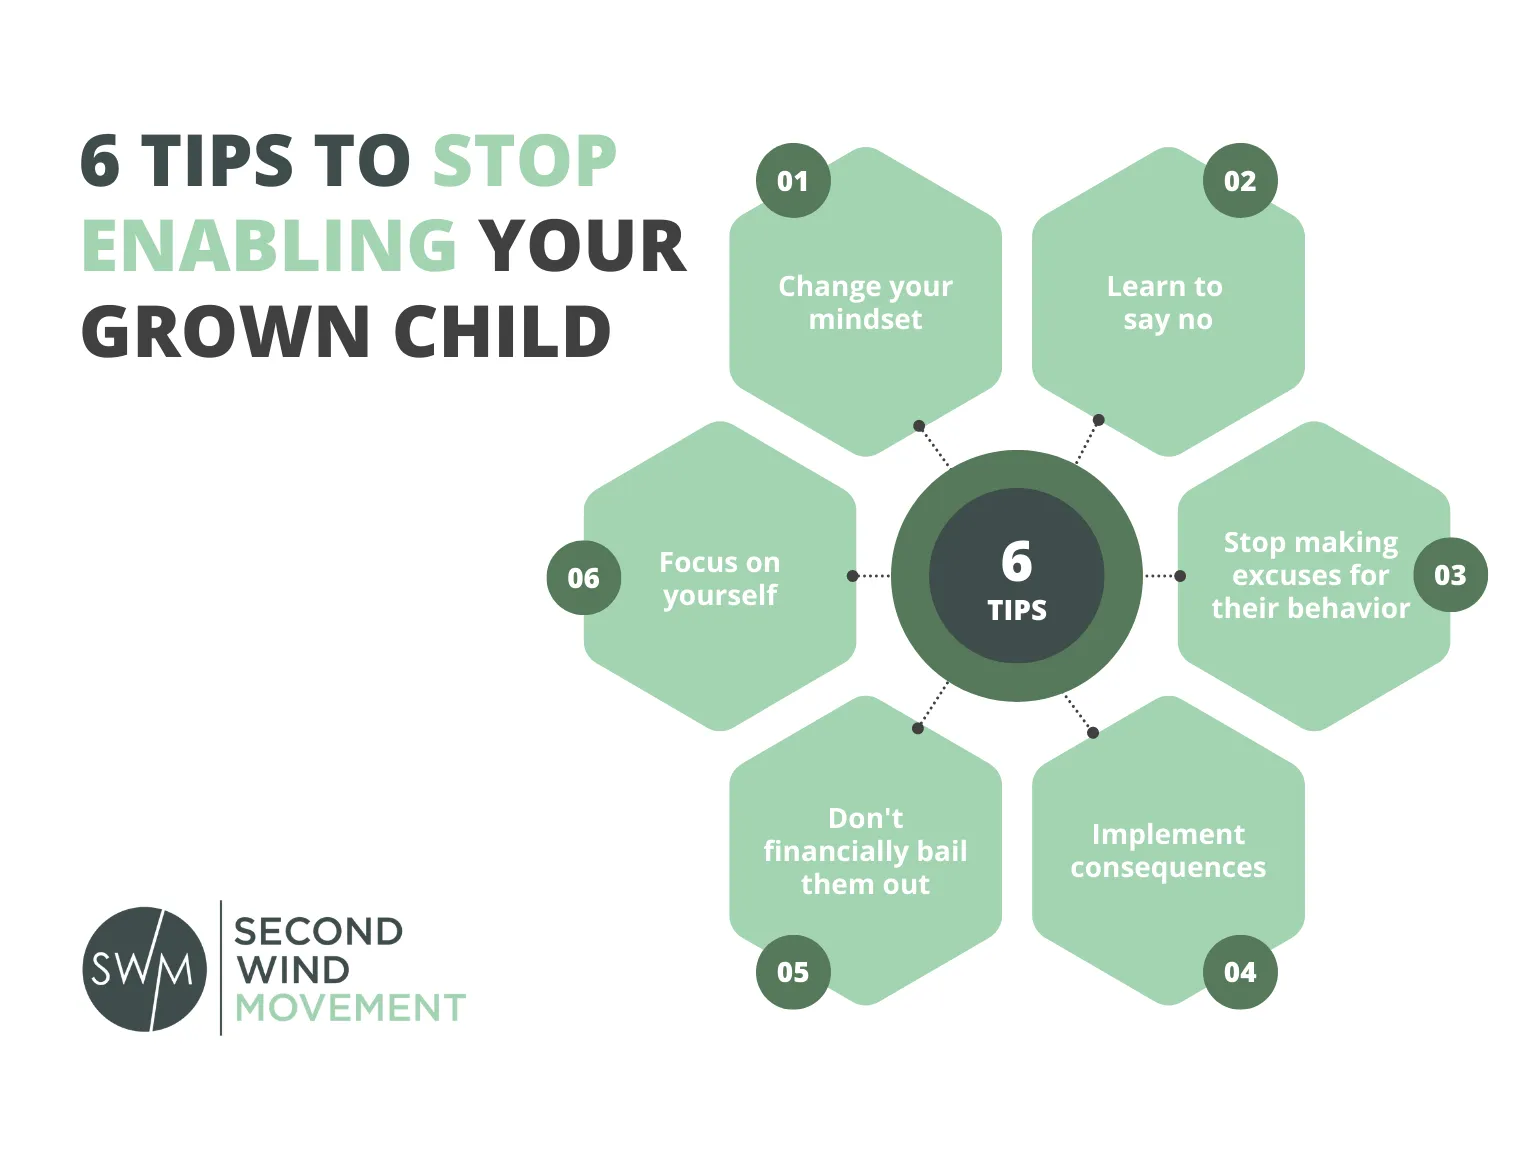 6 tips on how to stop enabling your grown child